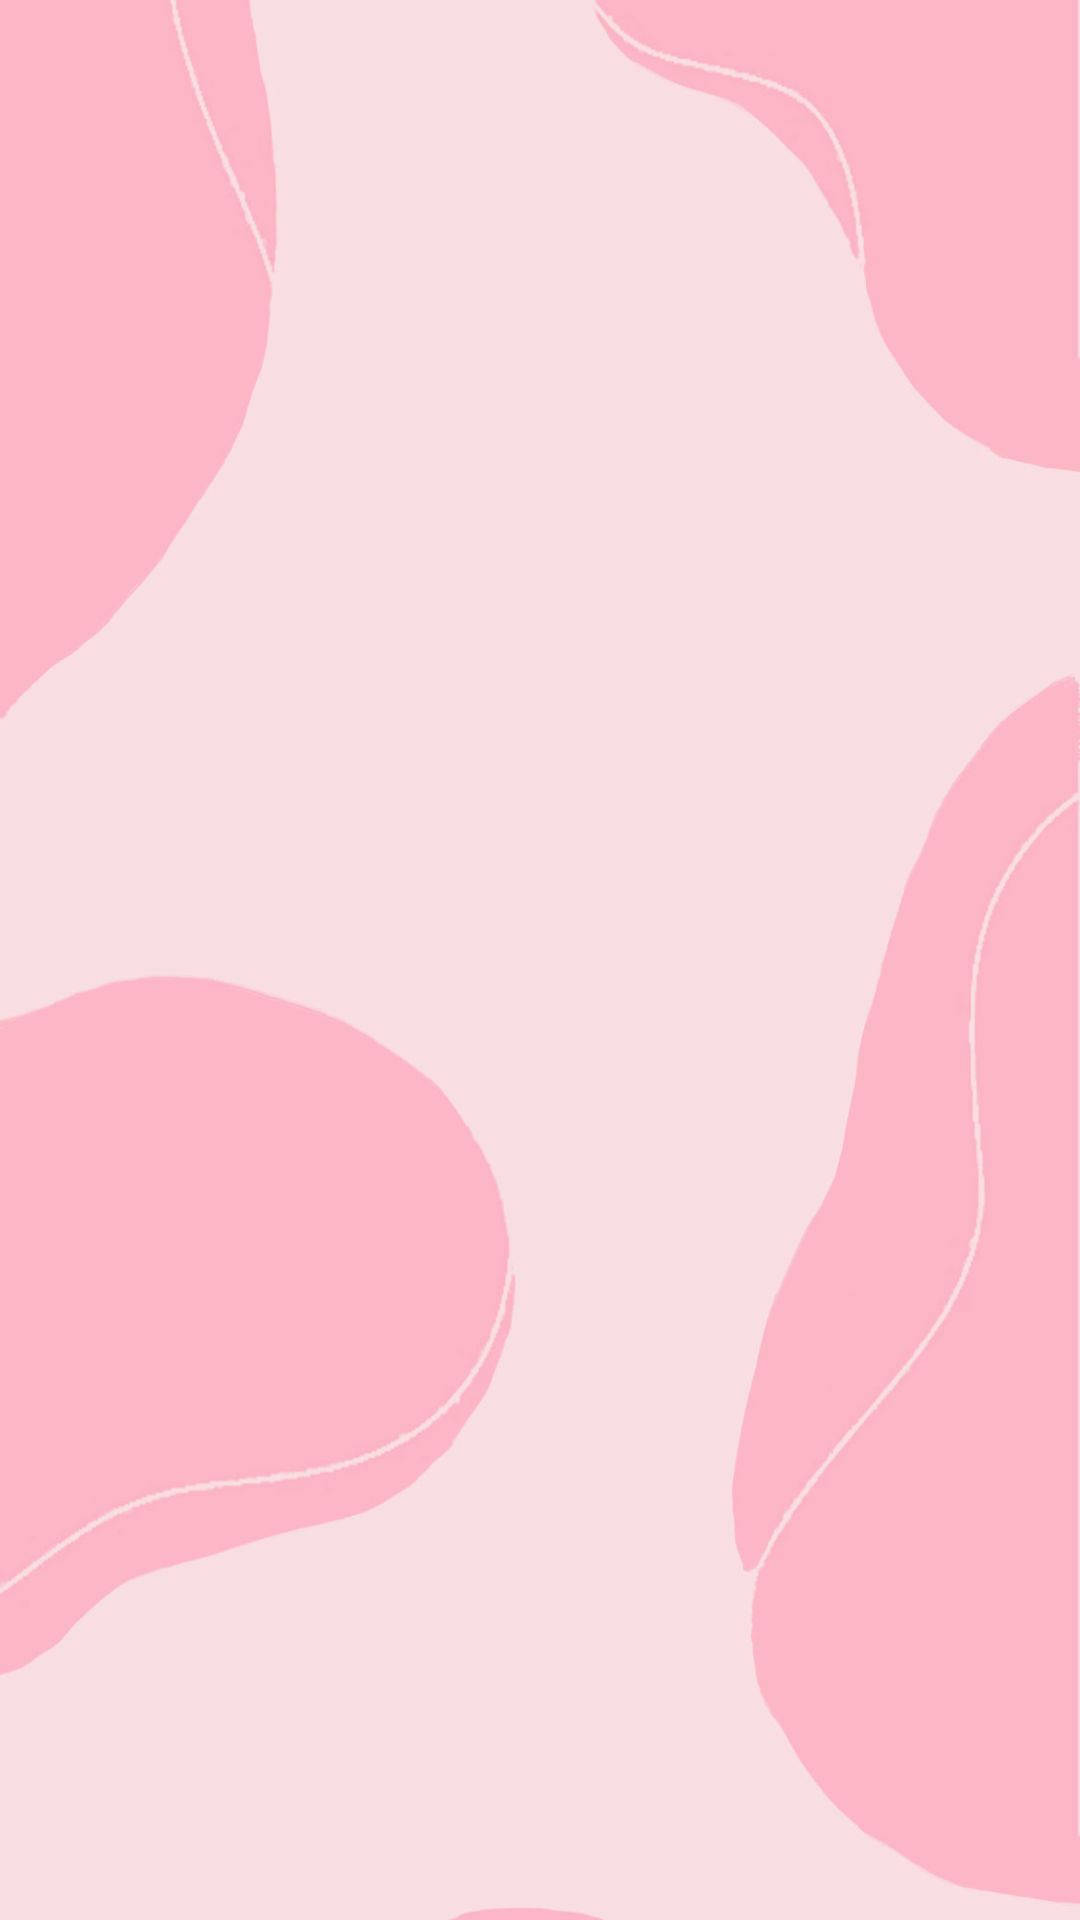 Aesthetic Pink Abstract Wallpaper